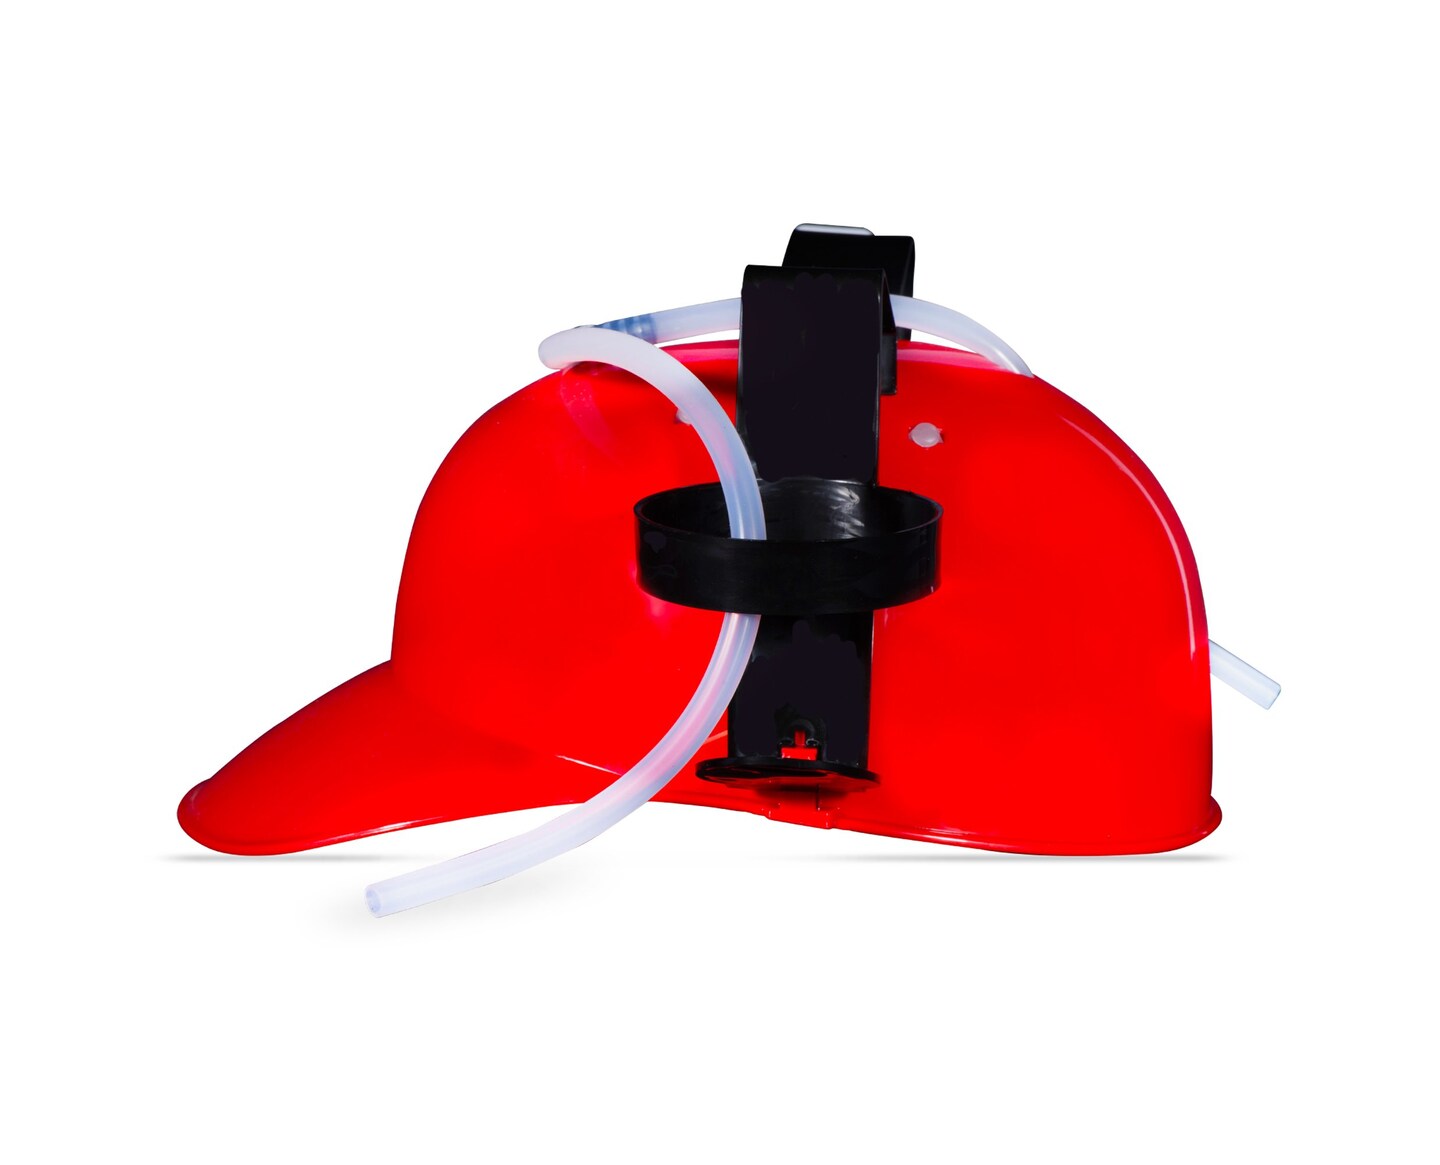 Beer And Soda Drinking Helmet Party Hat - Beer And Soda Guzzler